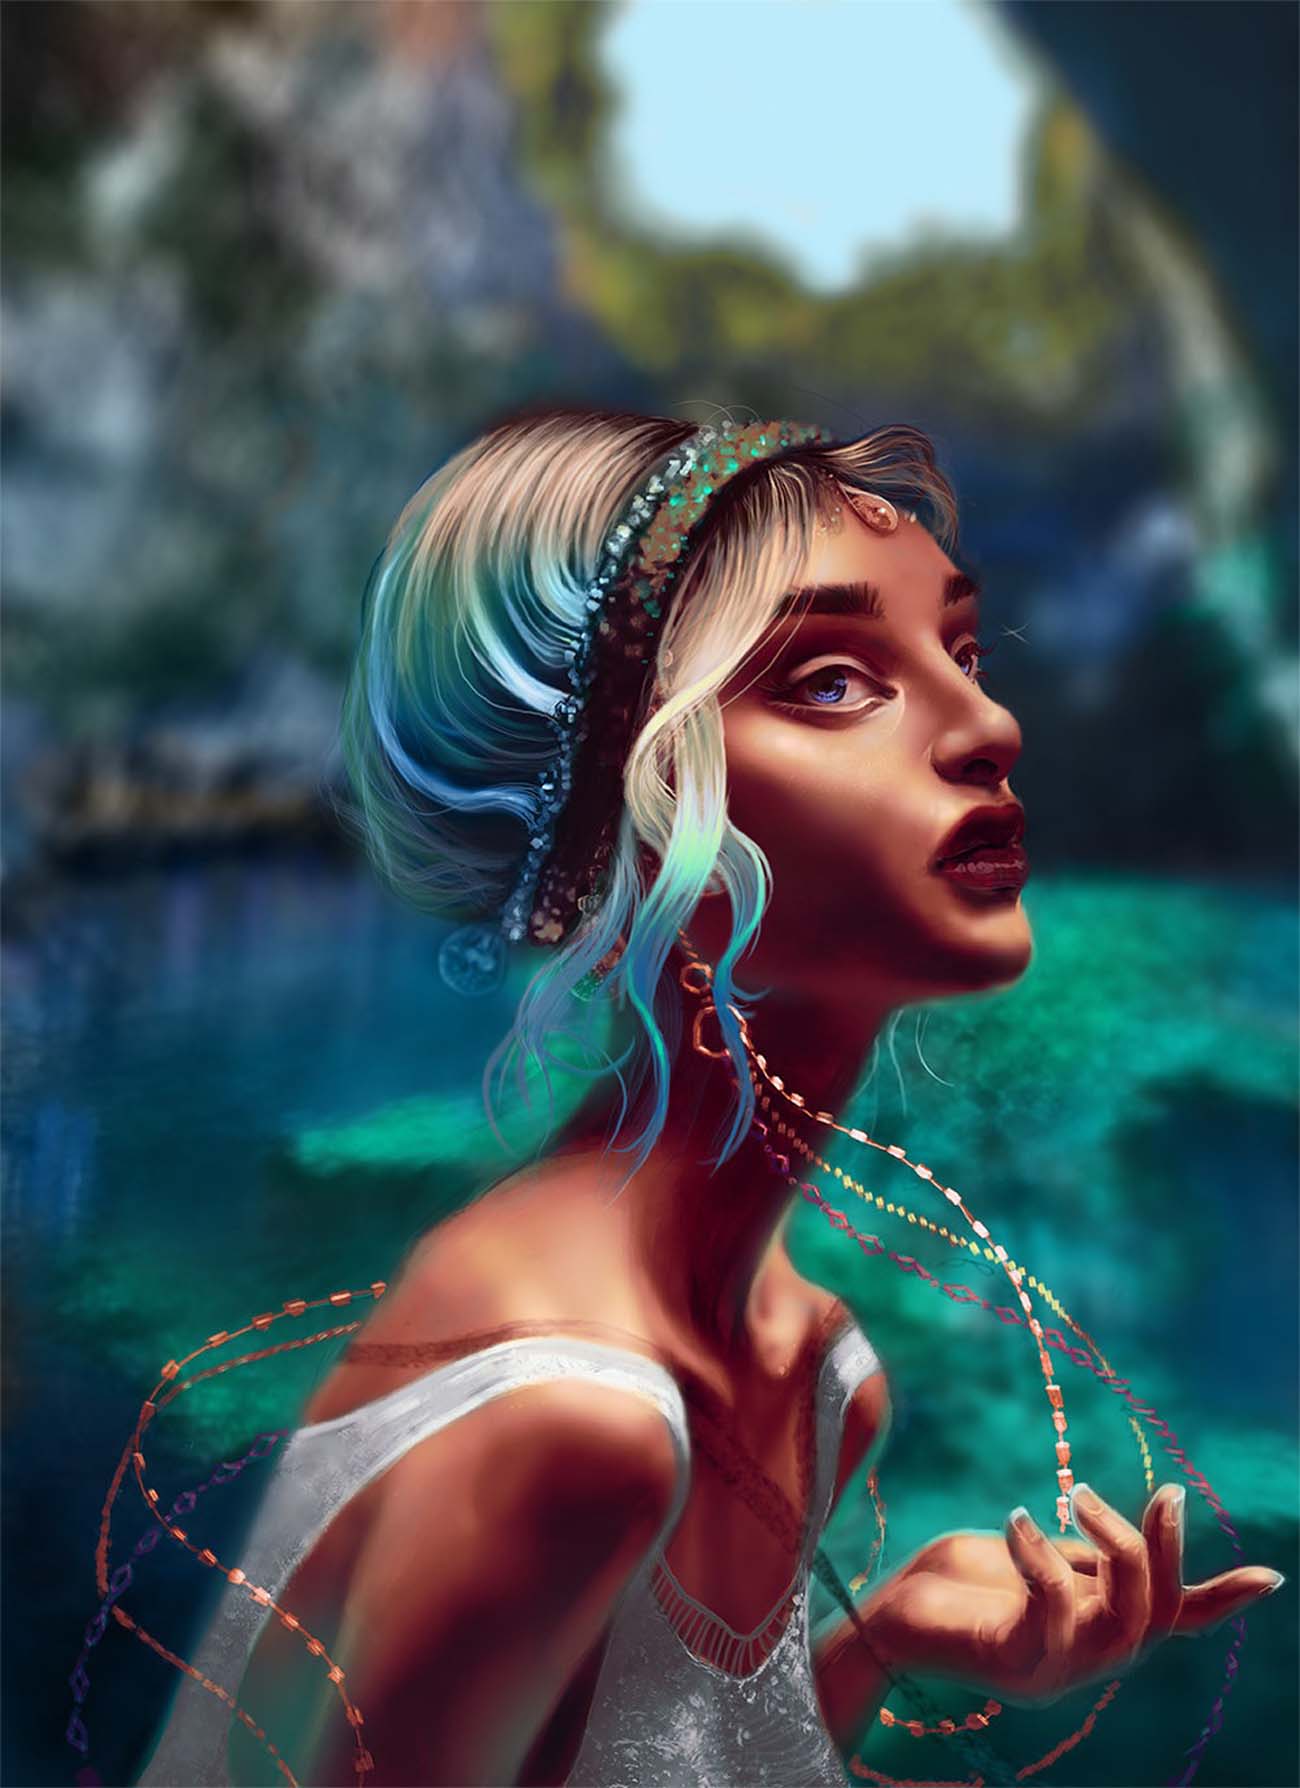 Digital Painting Inspiration #013 - Paintable